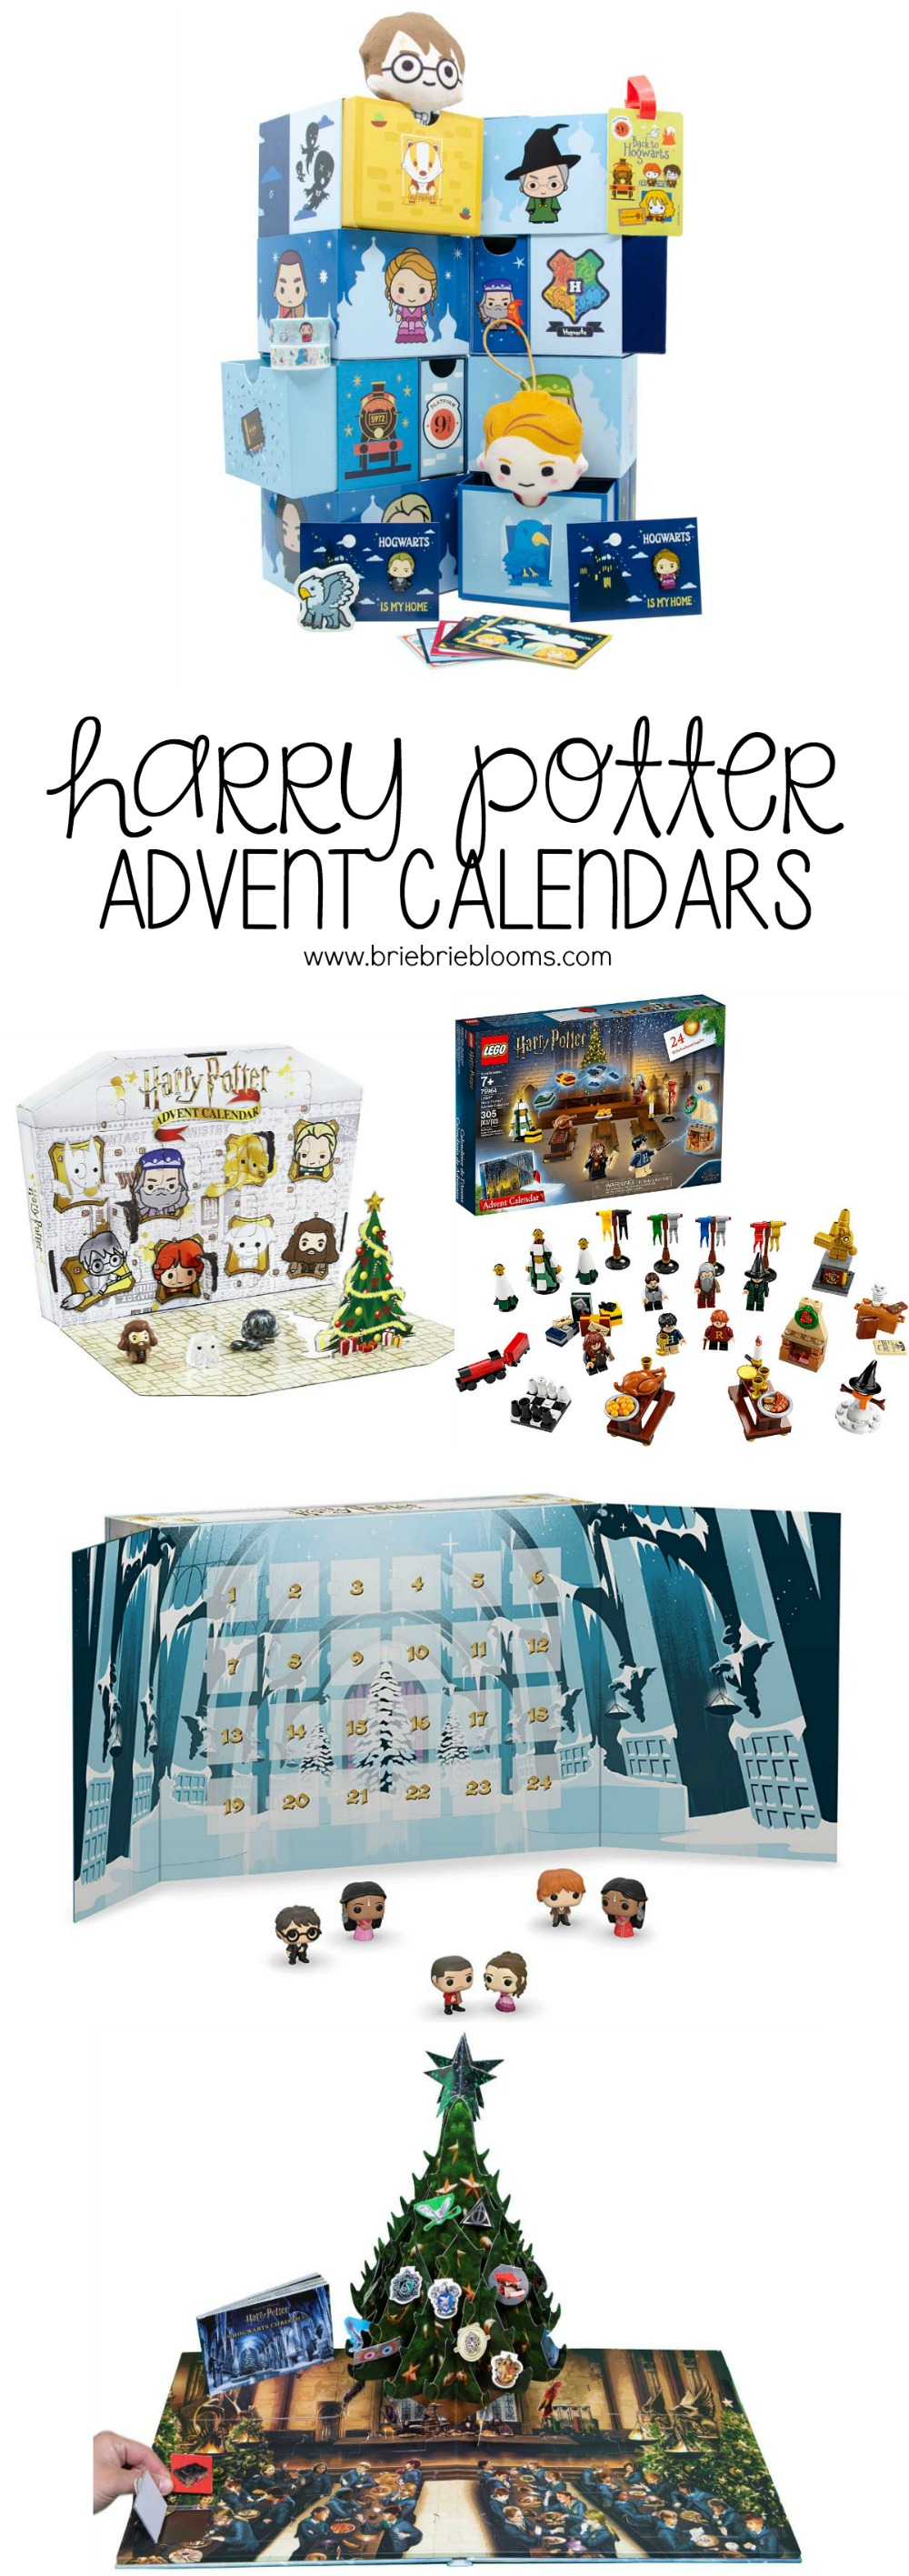 Check out these Harry Potter advent calendars available on Amazon Prime with free one-day shipping!